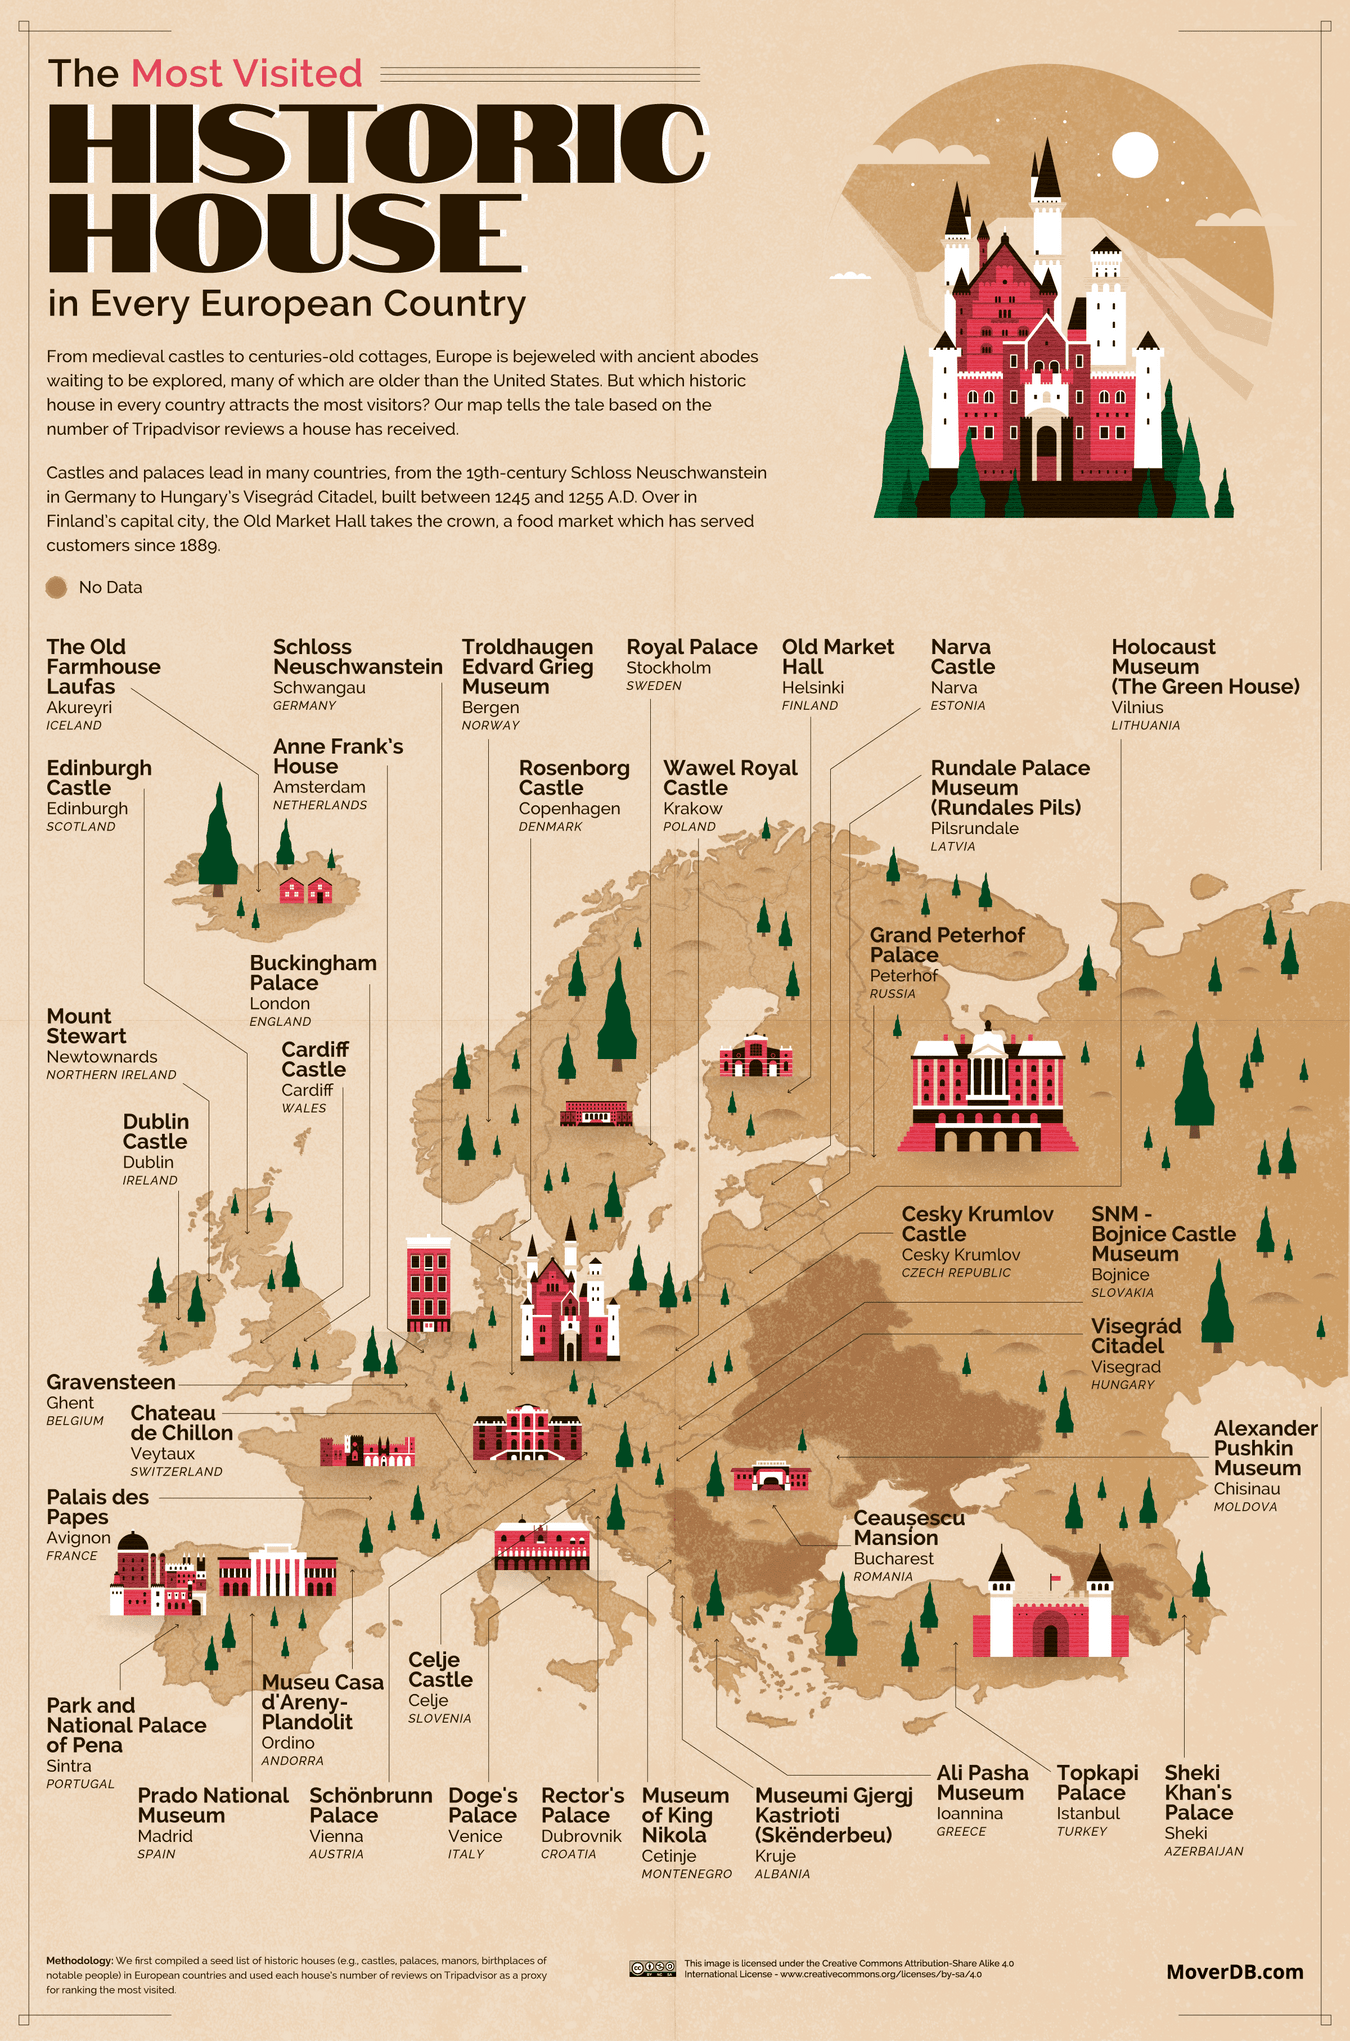 The Most Visited Historic House in Every European Country - Infographic